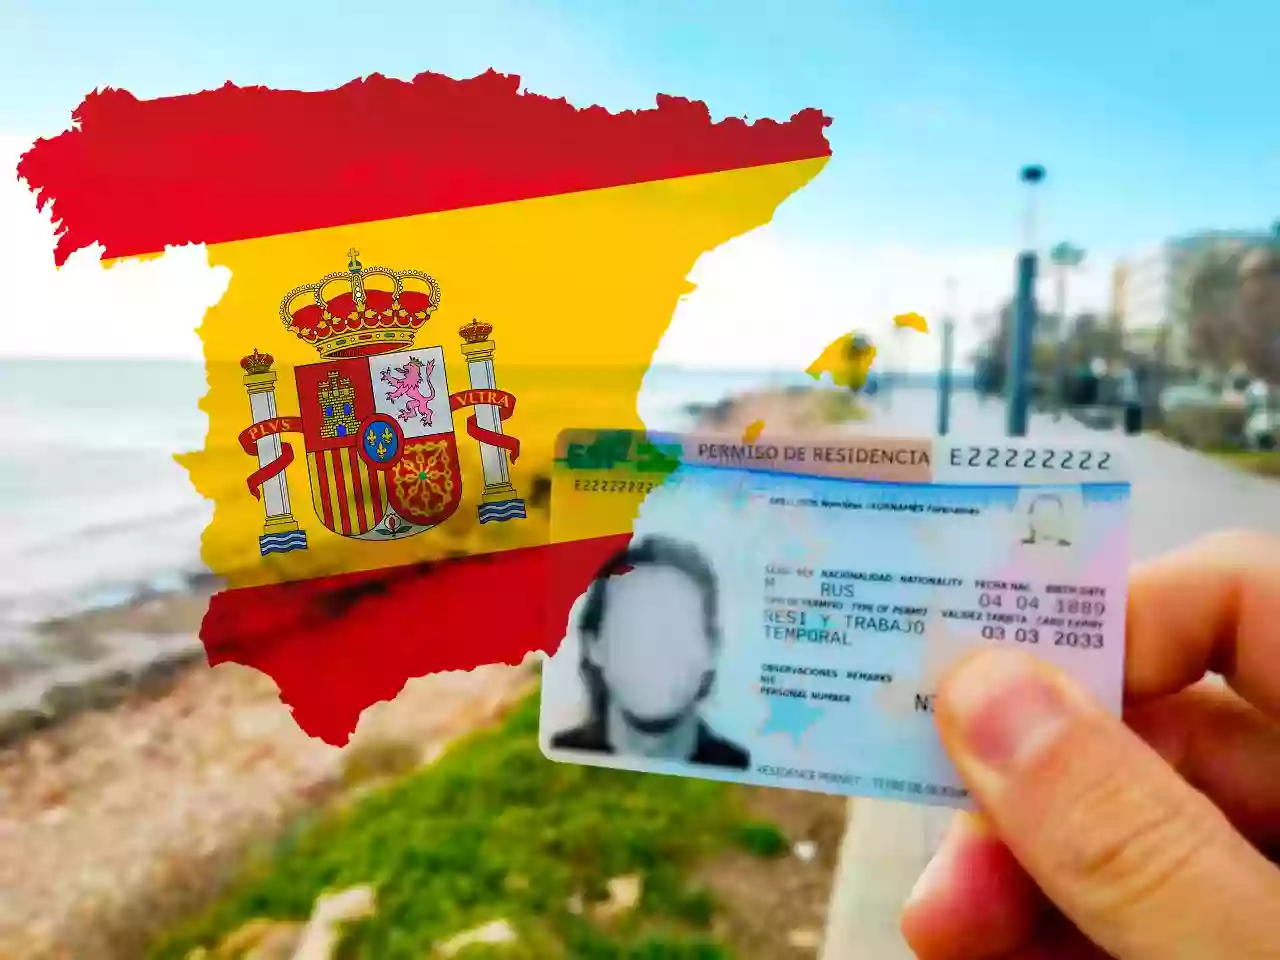 Living the Spanish dream: a step-by-step guide to obtaining a residence permit